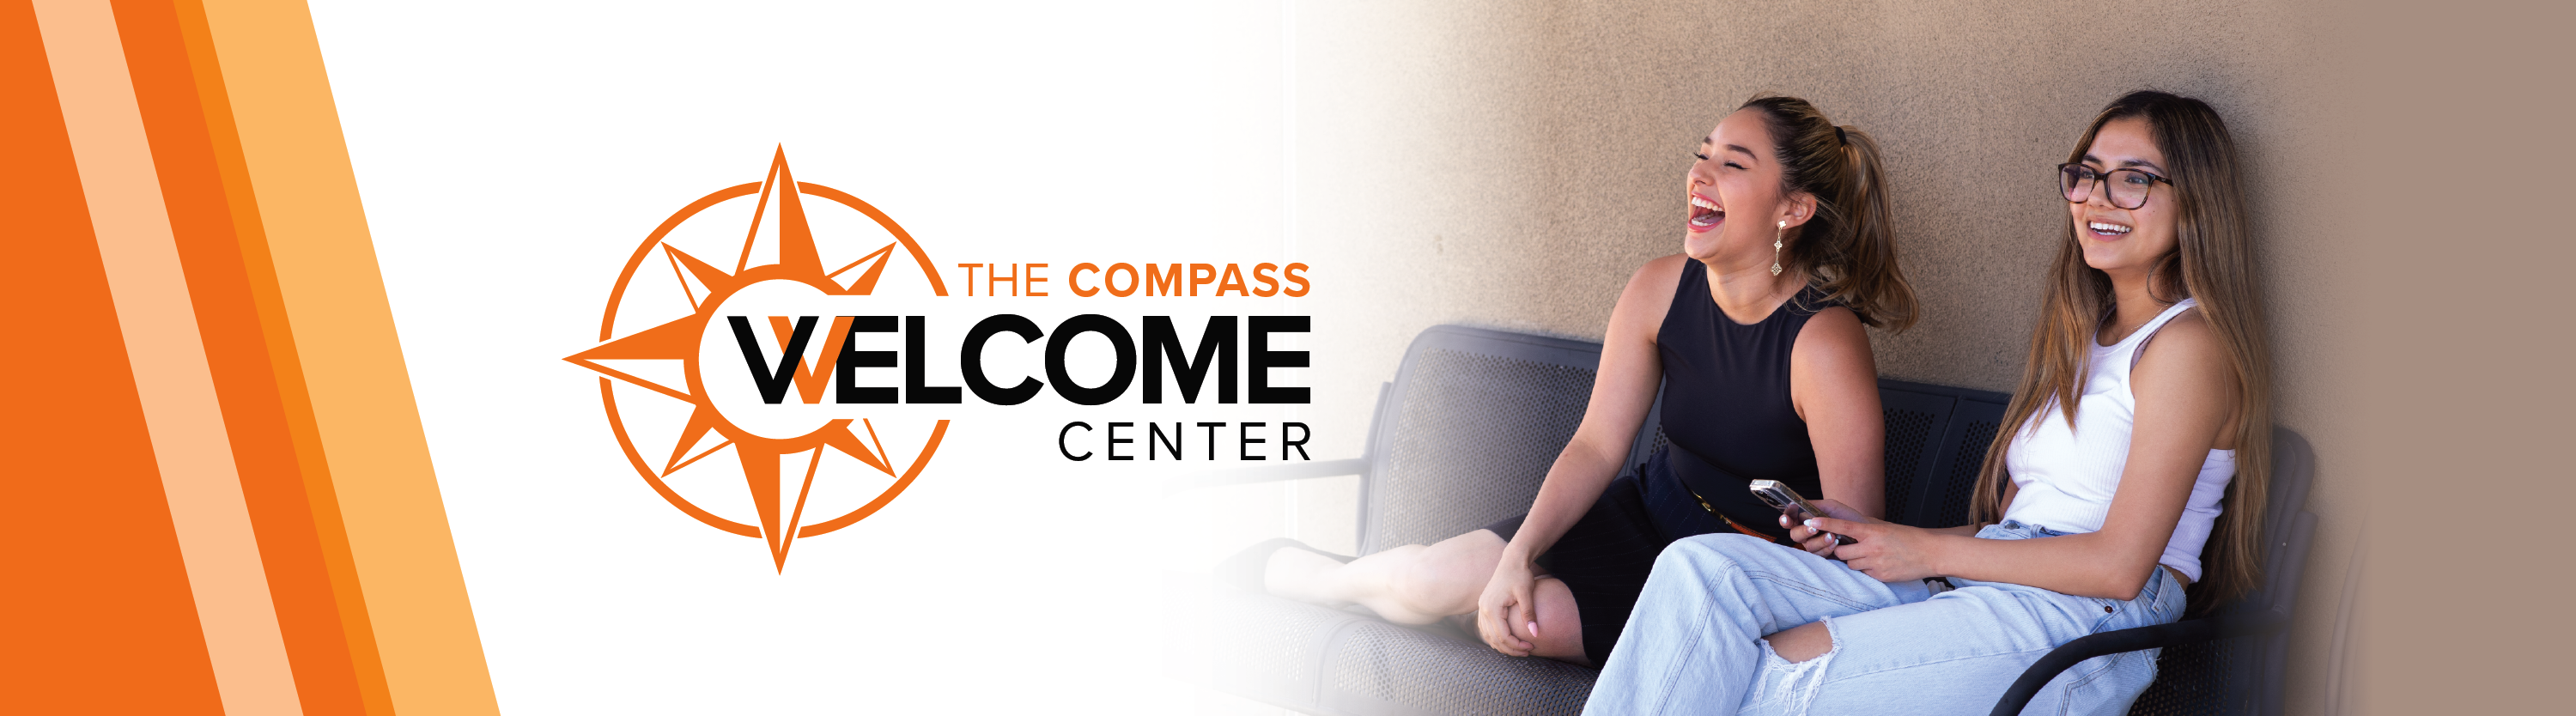 the compass welcome center with photo of two laughing girls